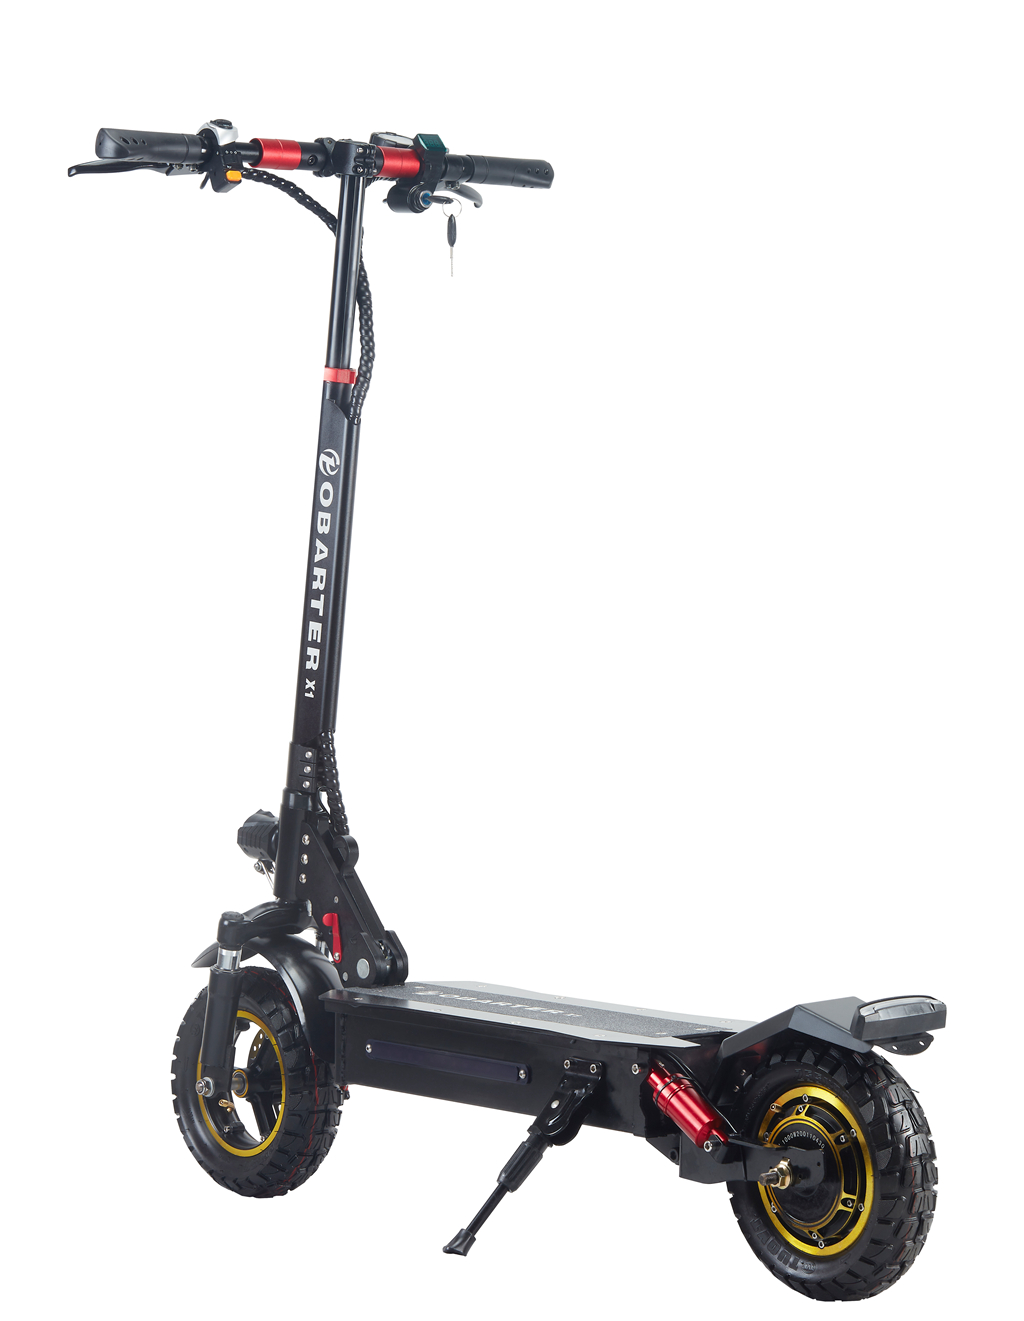 Electric scooter（Products in overseas warehouses in the US）